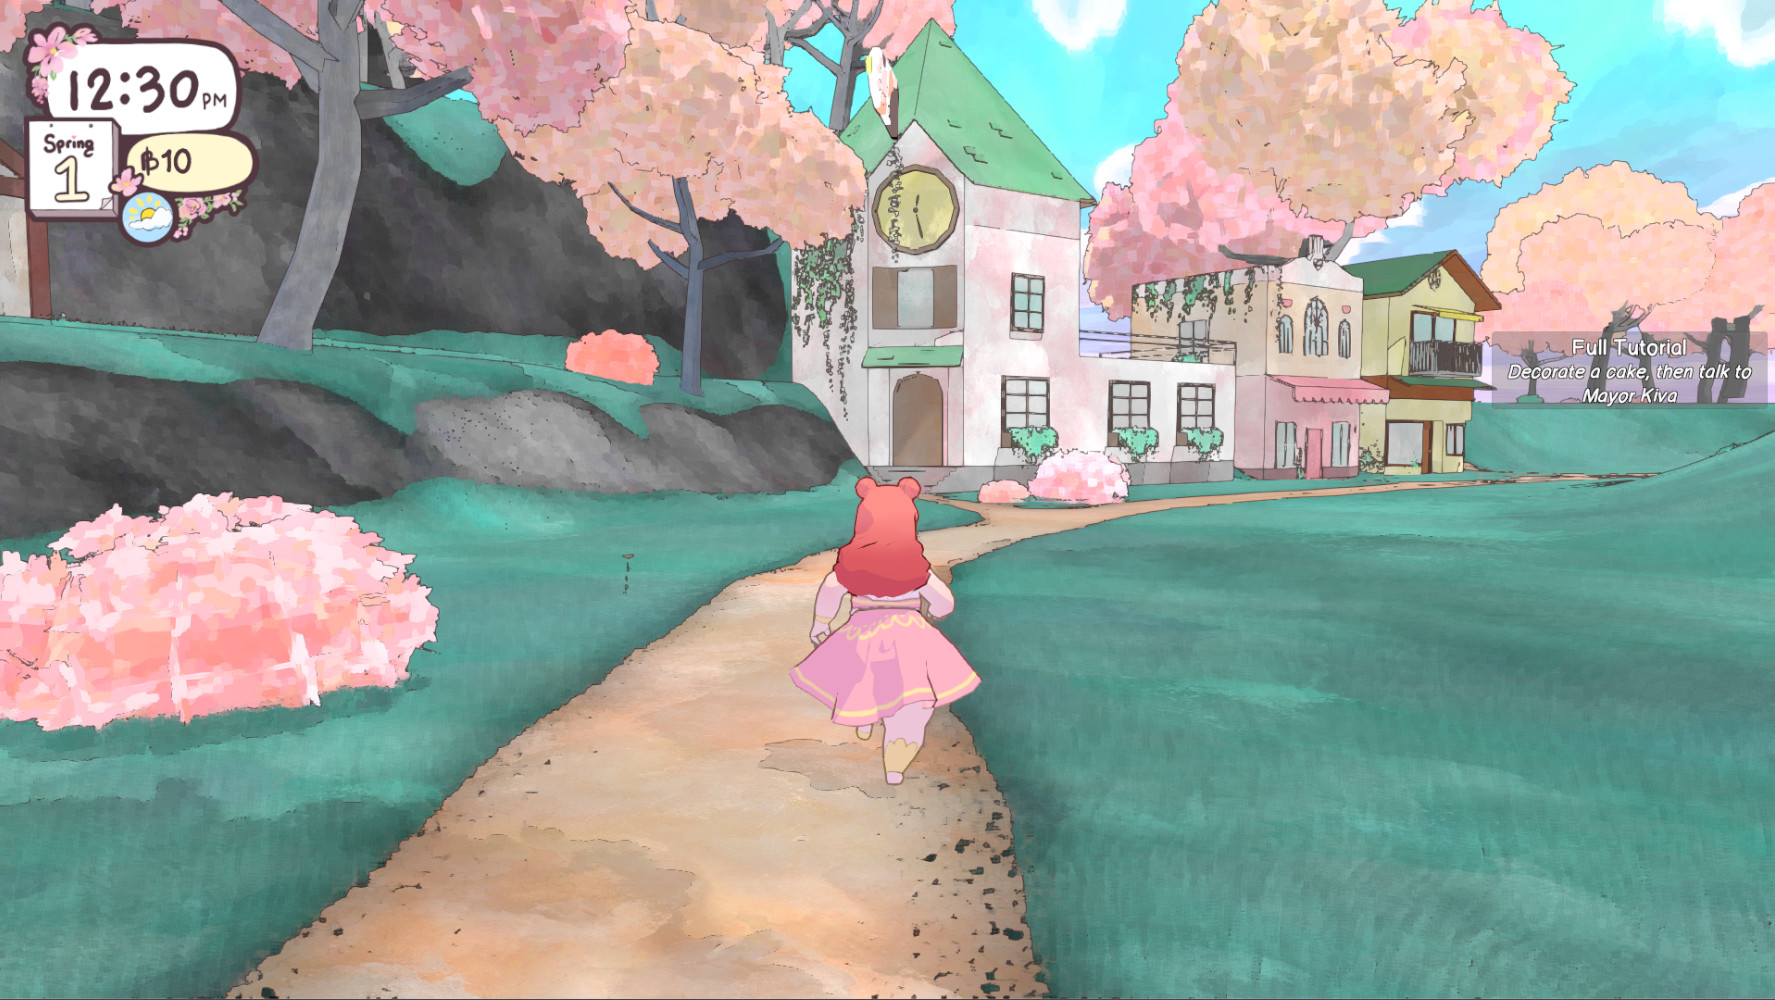 Calico Is An Upcoming Game Revolving Around Cat Cafes, Magical Girls, And A Strange World